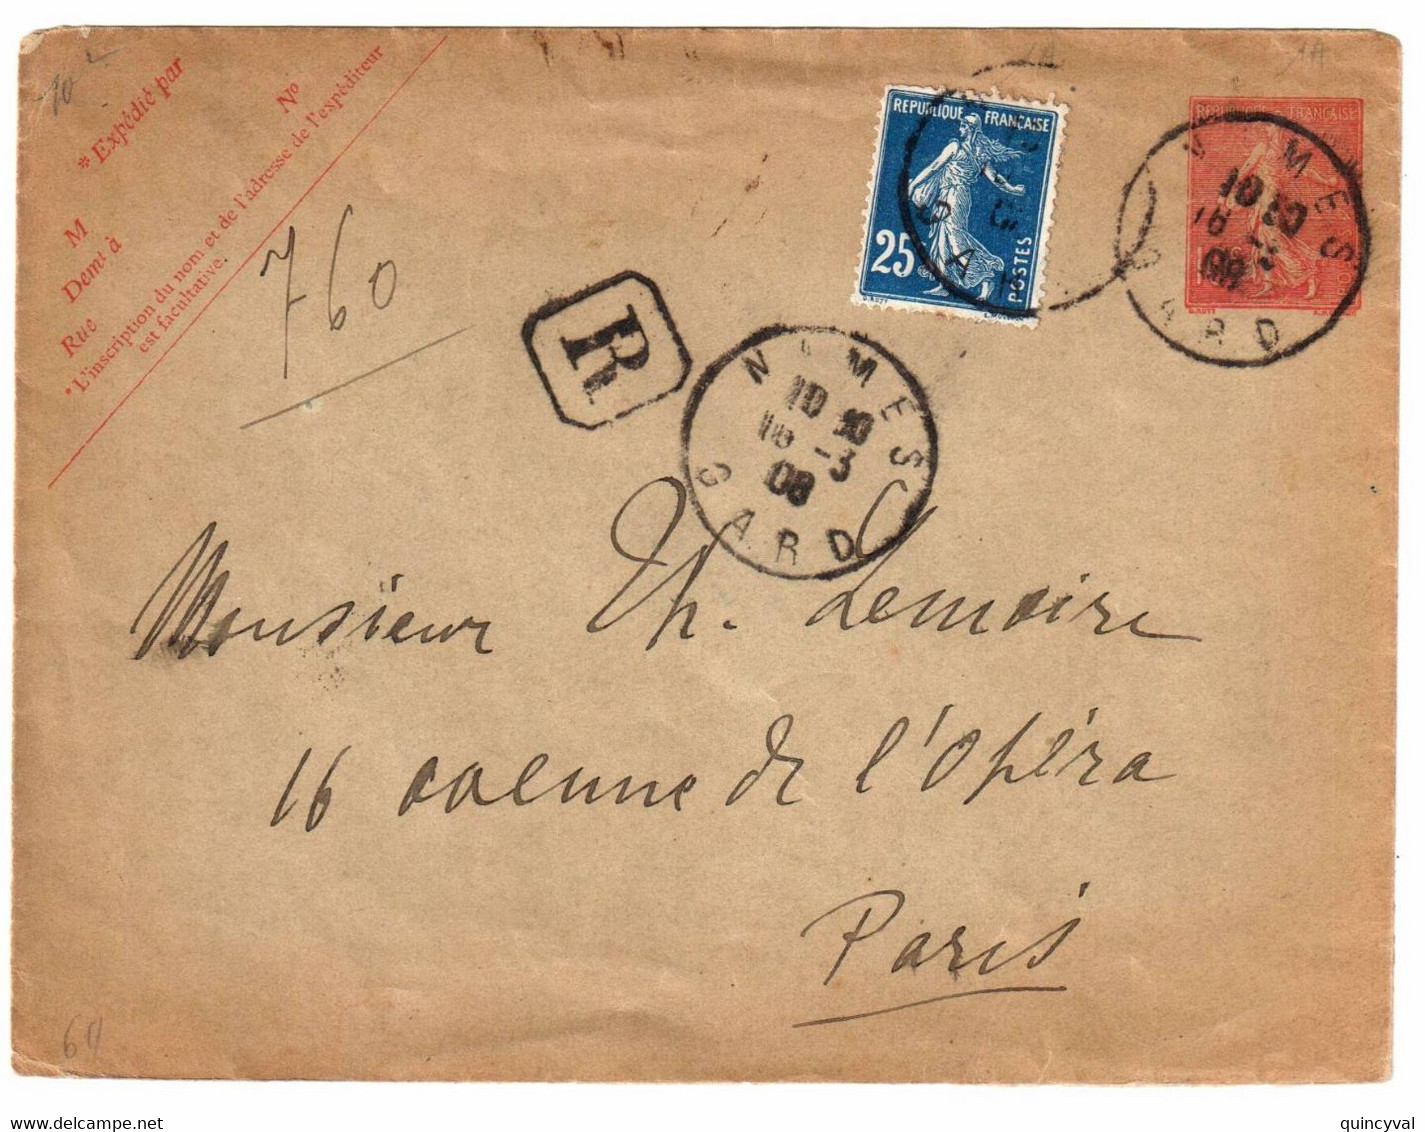 Enveloppe Entier Postal 15c Semeuse Lignée Vert Date 412 Yv 130-E1 Storch B11 Format 123 X 96 - Standard Covers & Stamped On Demand (before 1995)